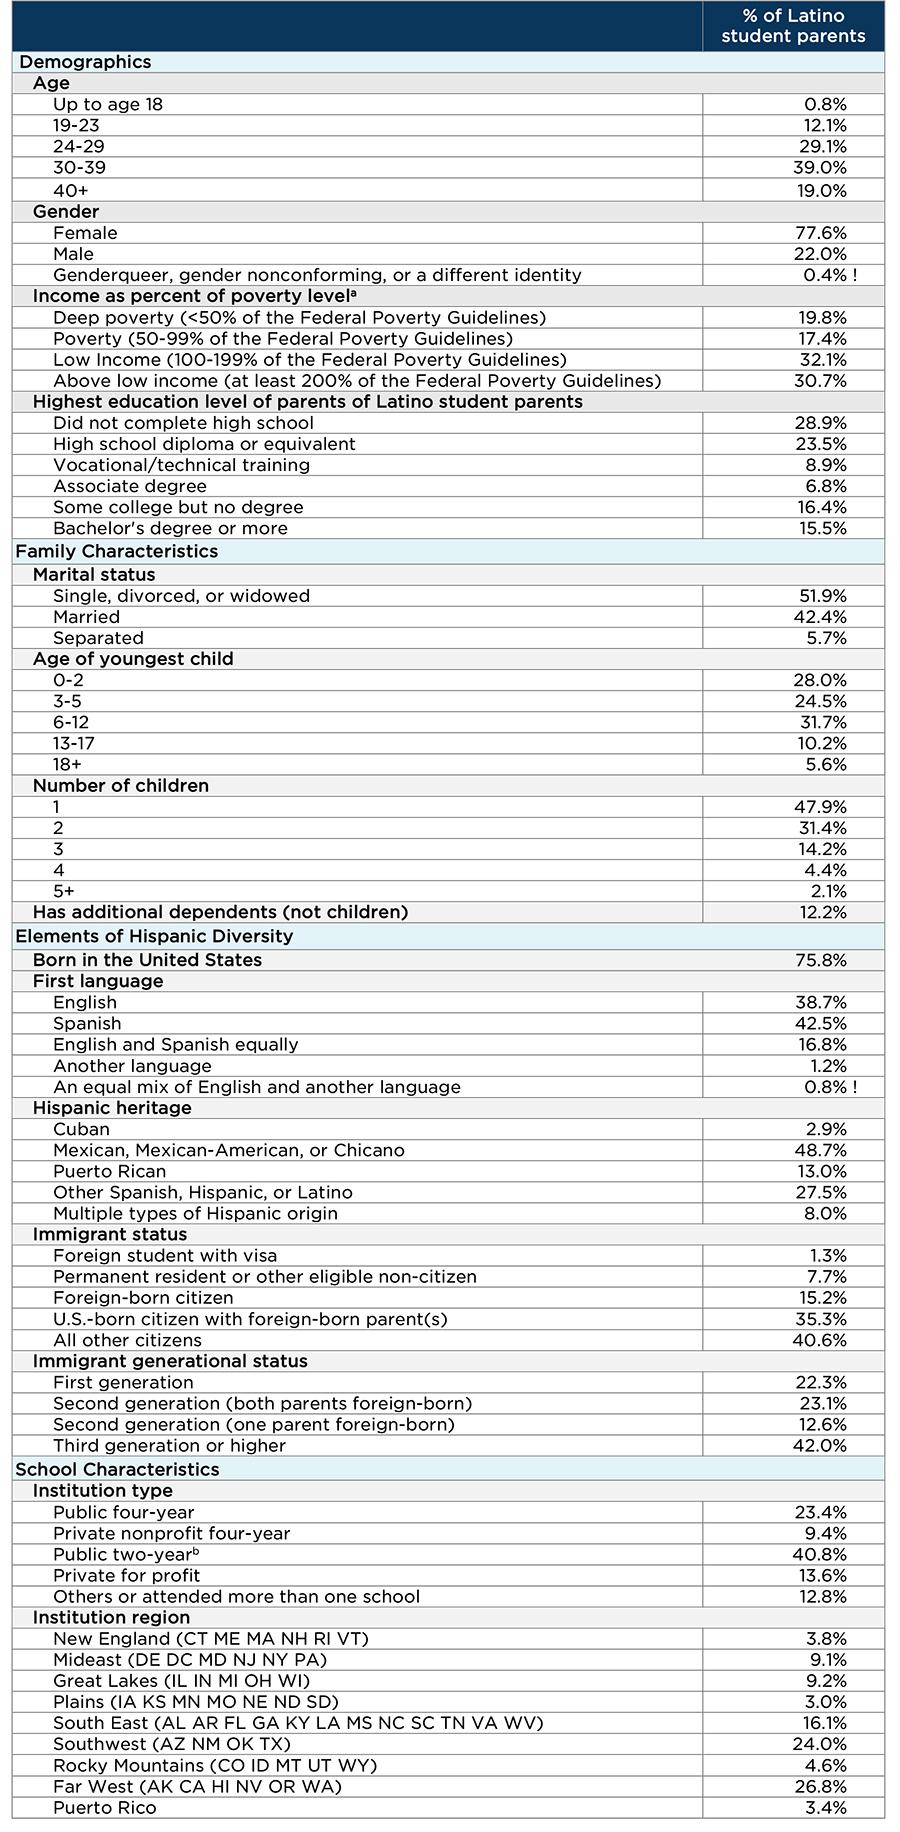 Table 1. Statistical portrait of Latino student parents